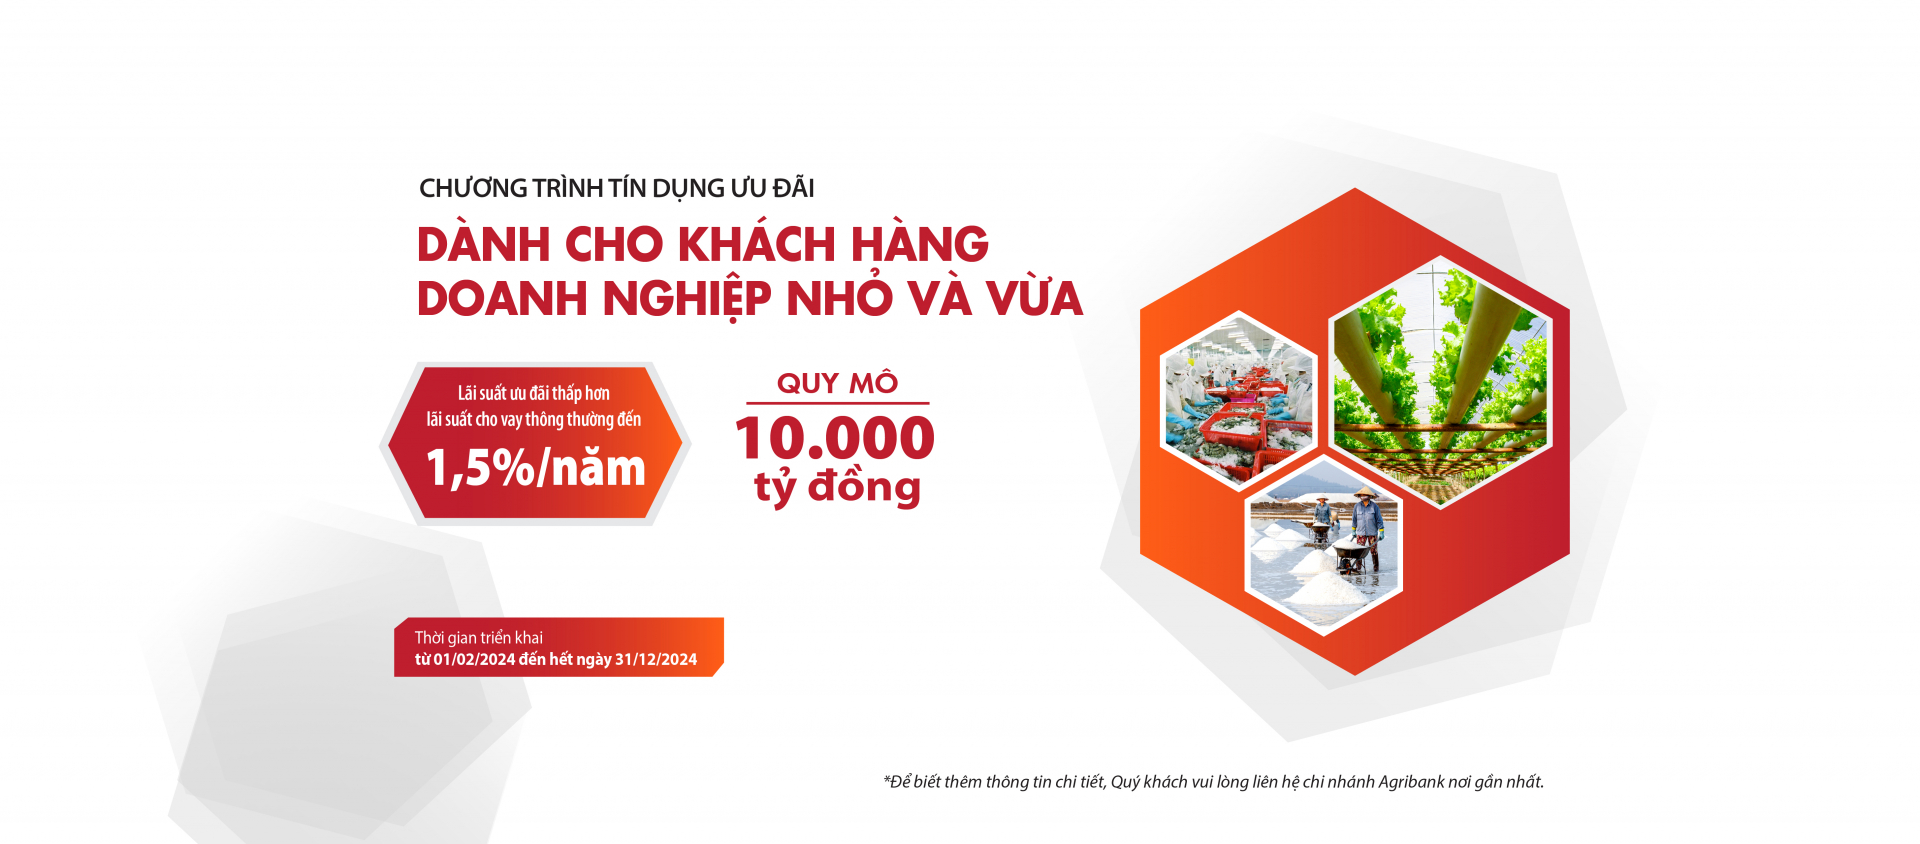 Agribank Khanh Hoa launches many low-interest credit programs for corporates